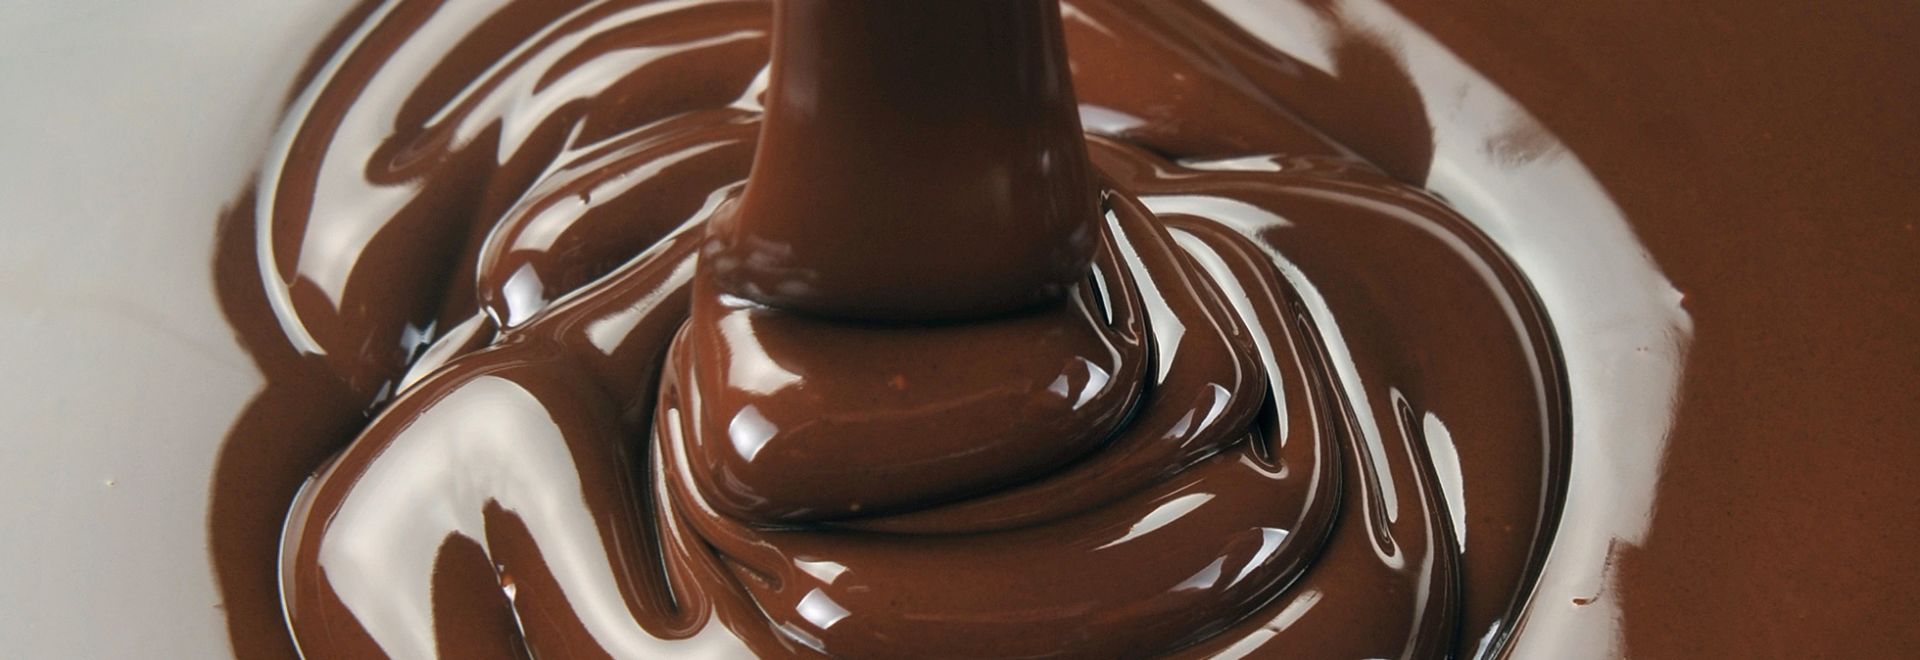 A pool of melted chocolate. Using the best baking chocolate is important when making holiday desserts.